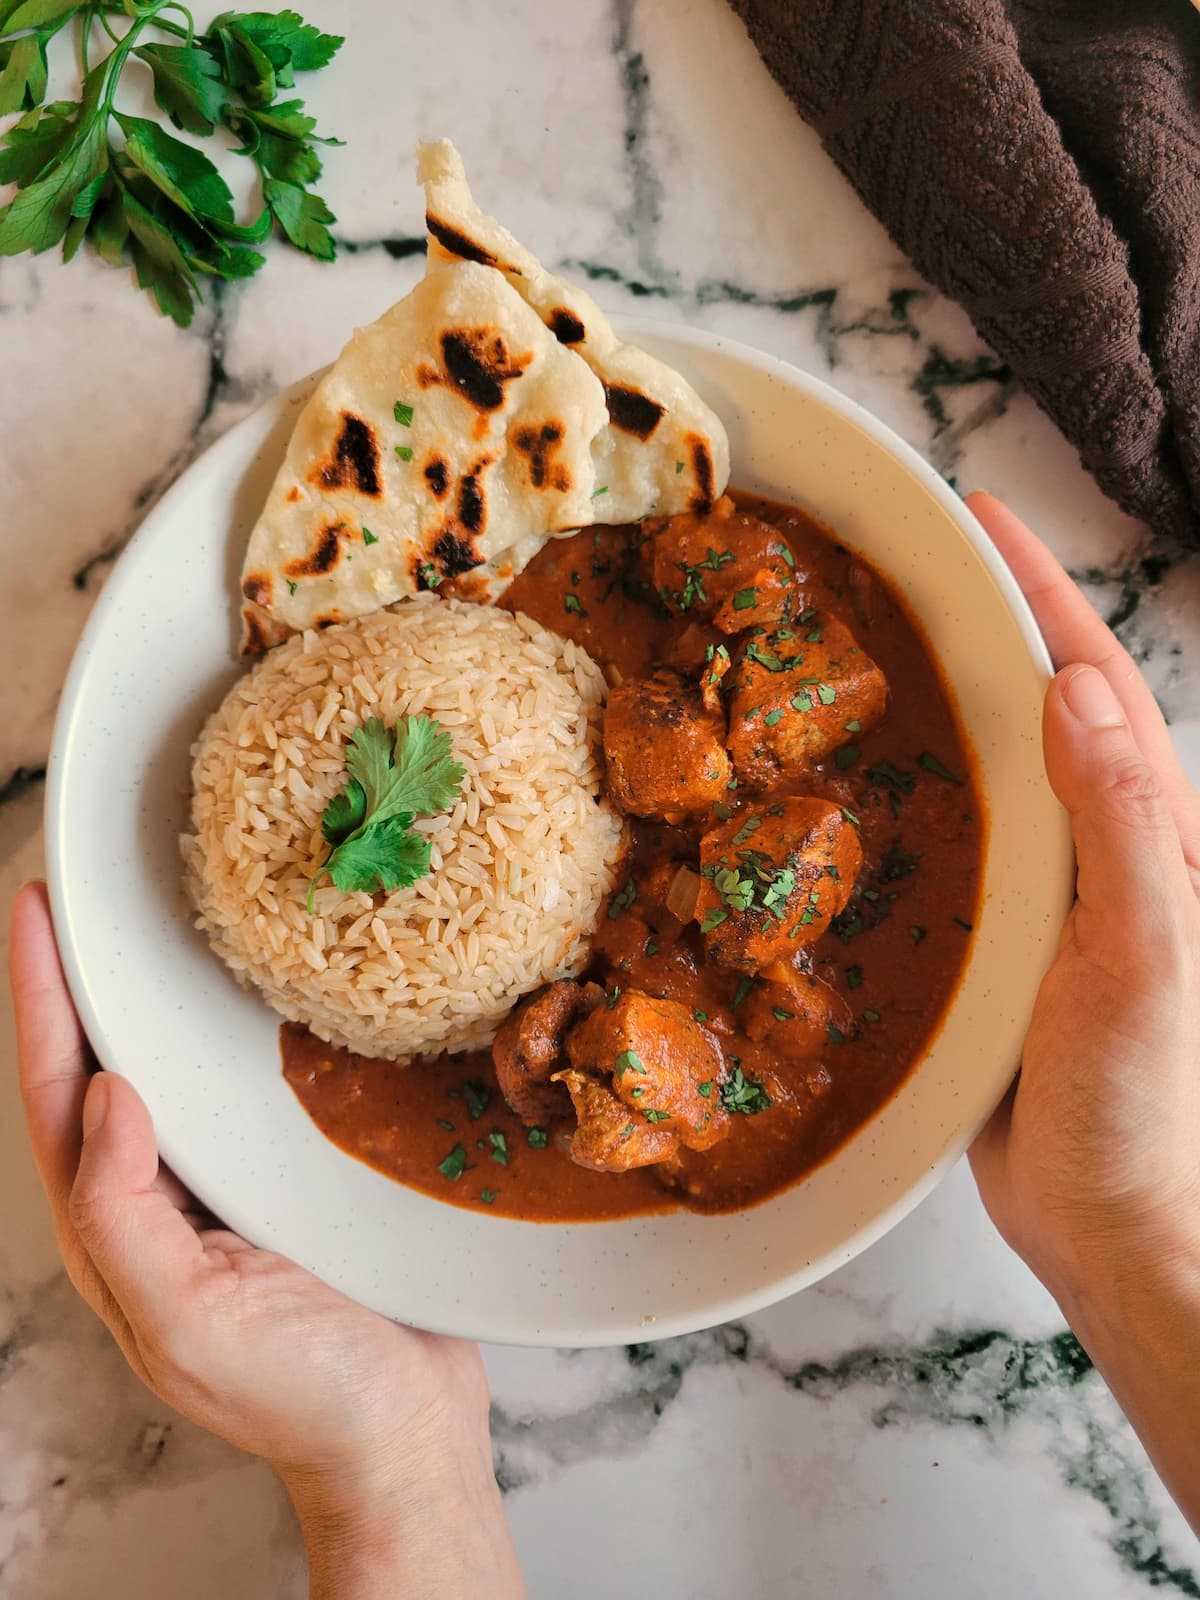 hands holding a bowl of butter chicken served with rice and naan bread, garnished with fresh chopped parsley